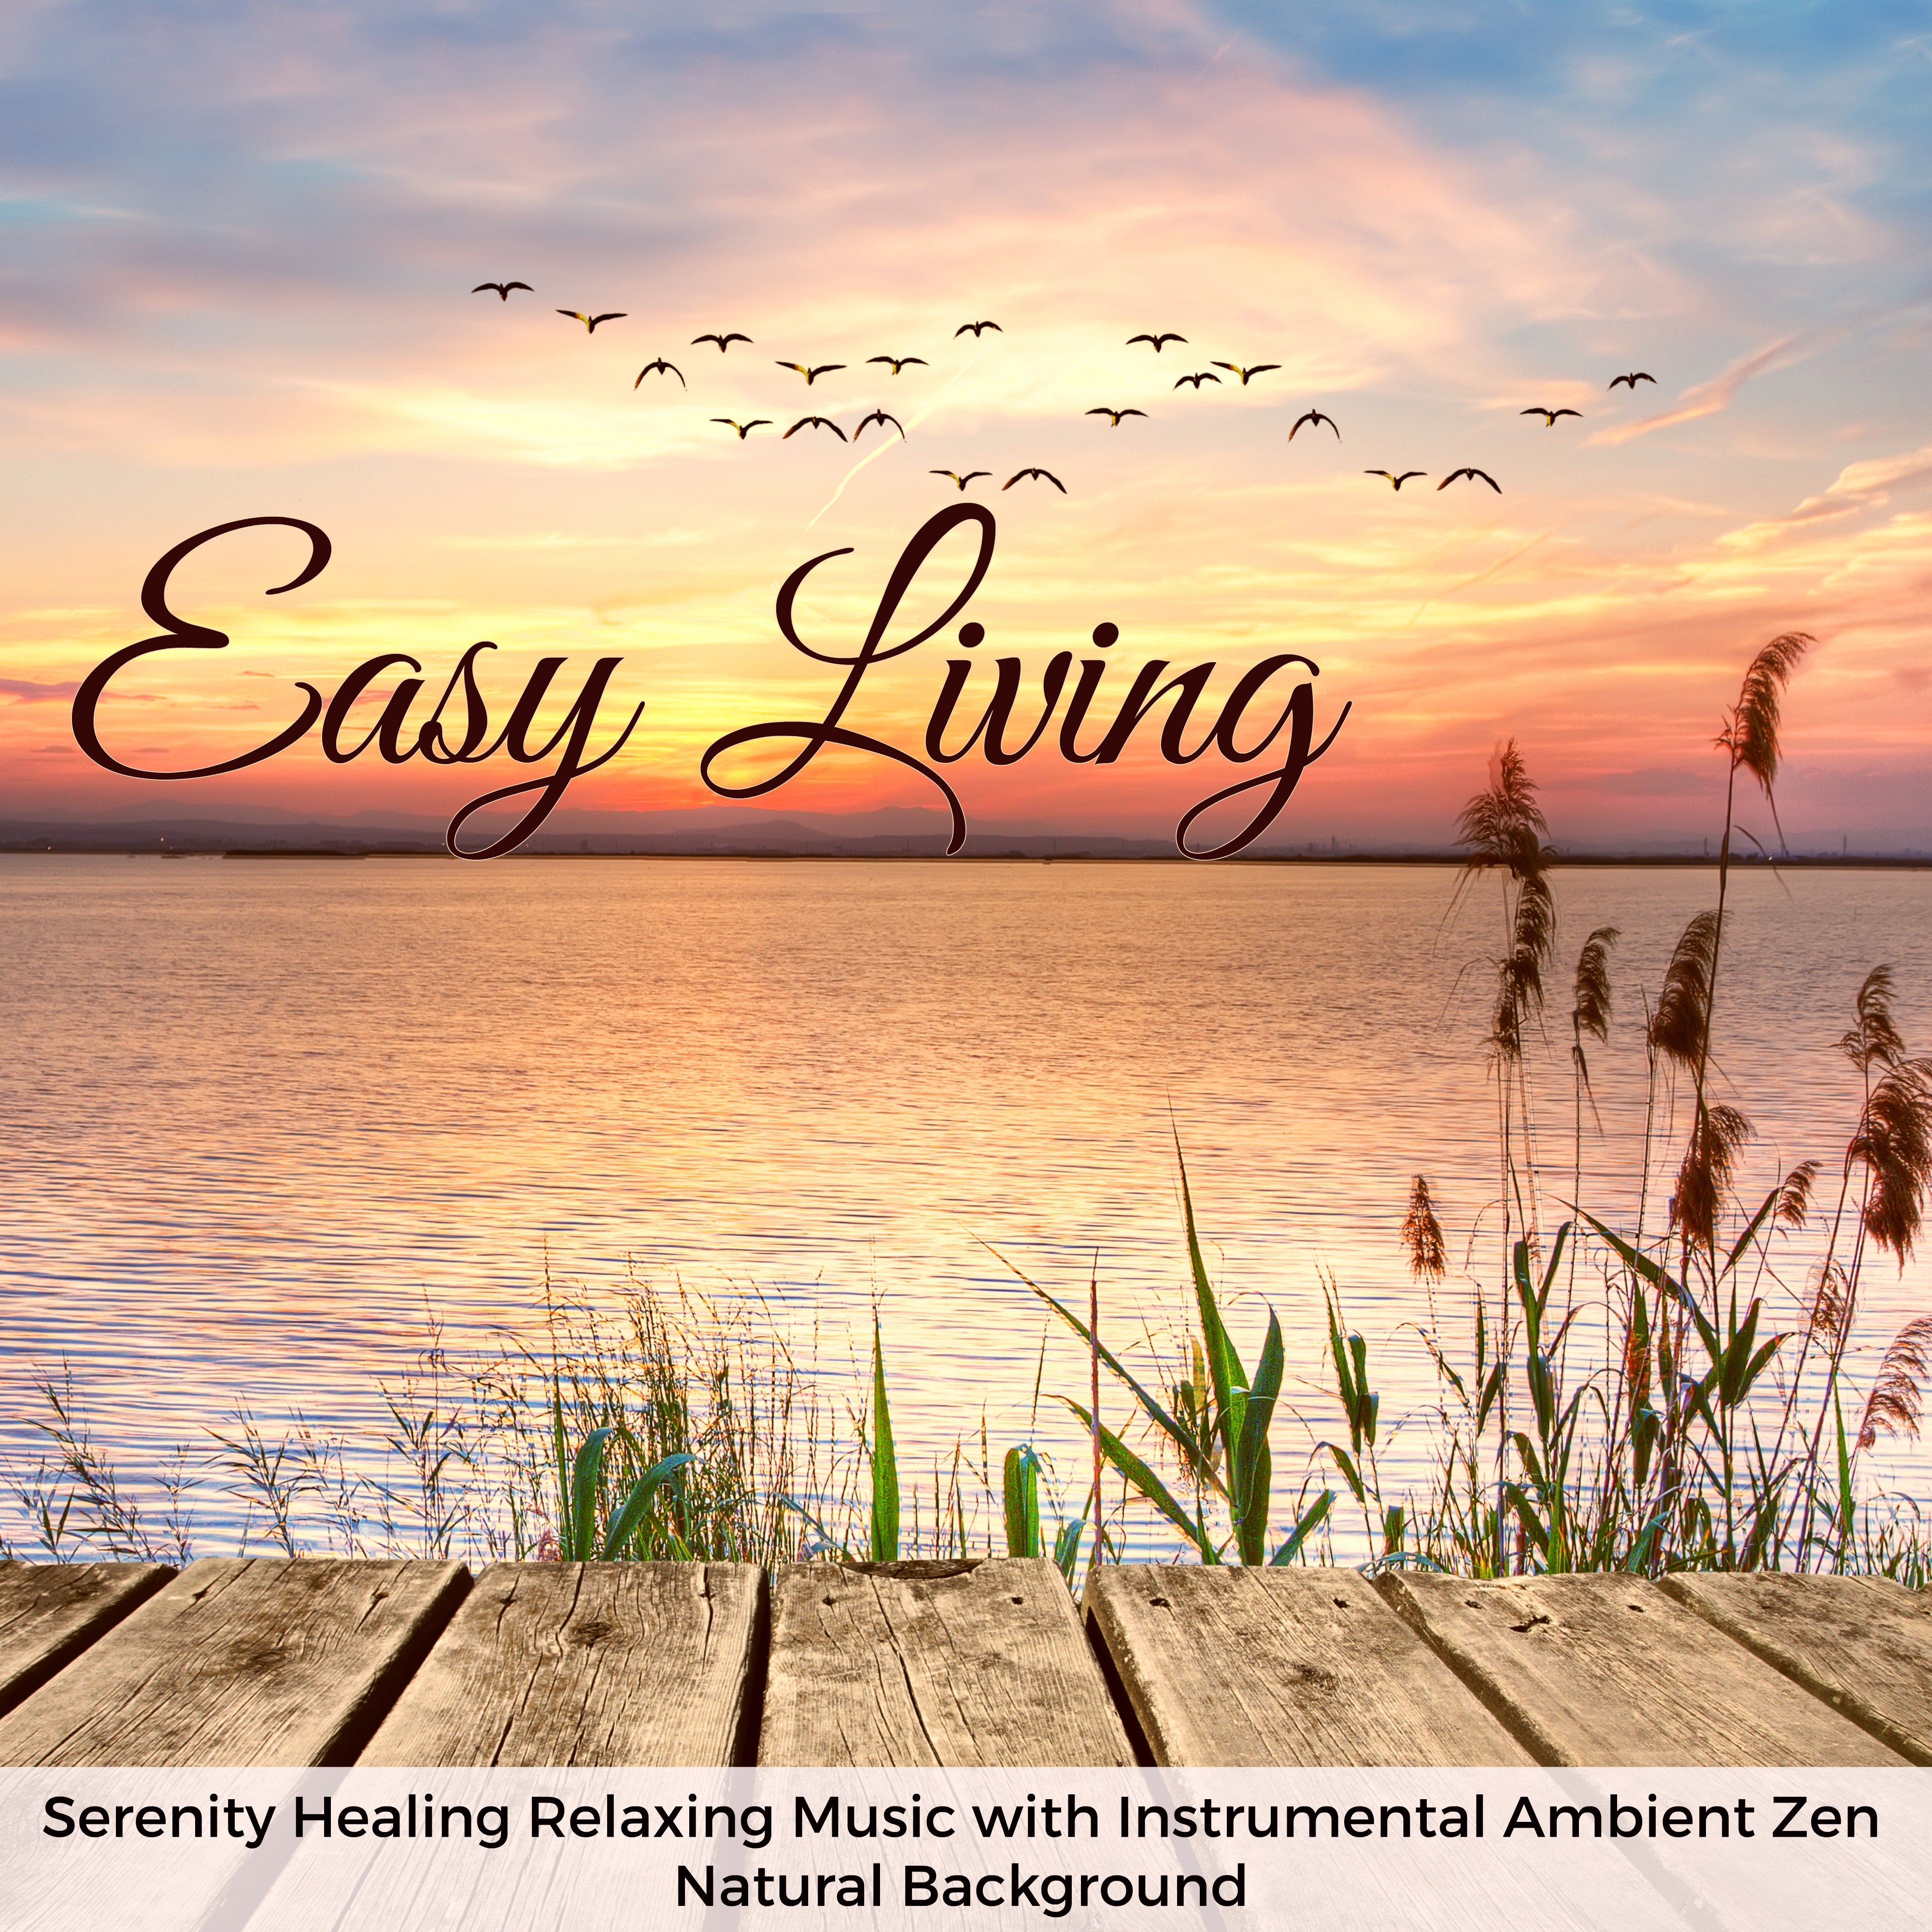 Easy Living  Serenity Healing Relaxing Music with Instrumental Ambient Zen Natural Background